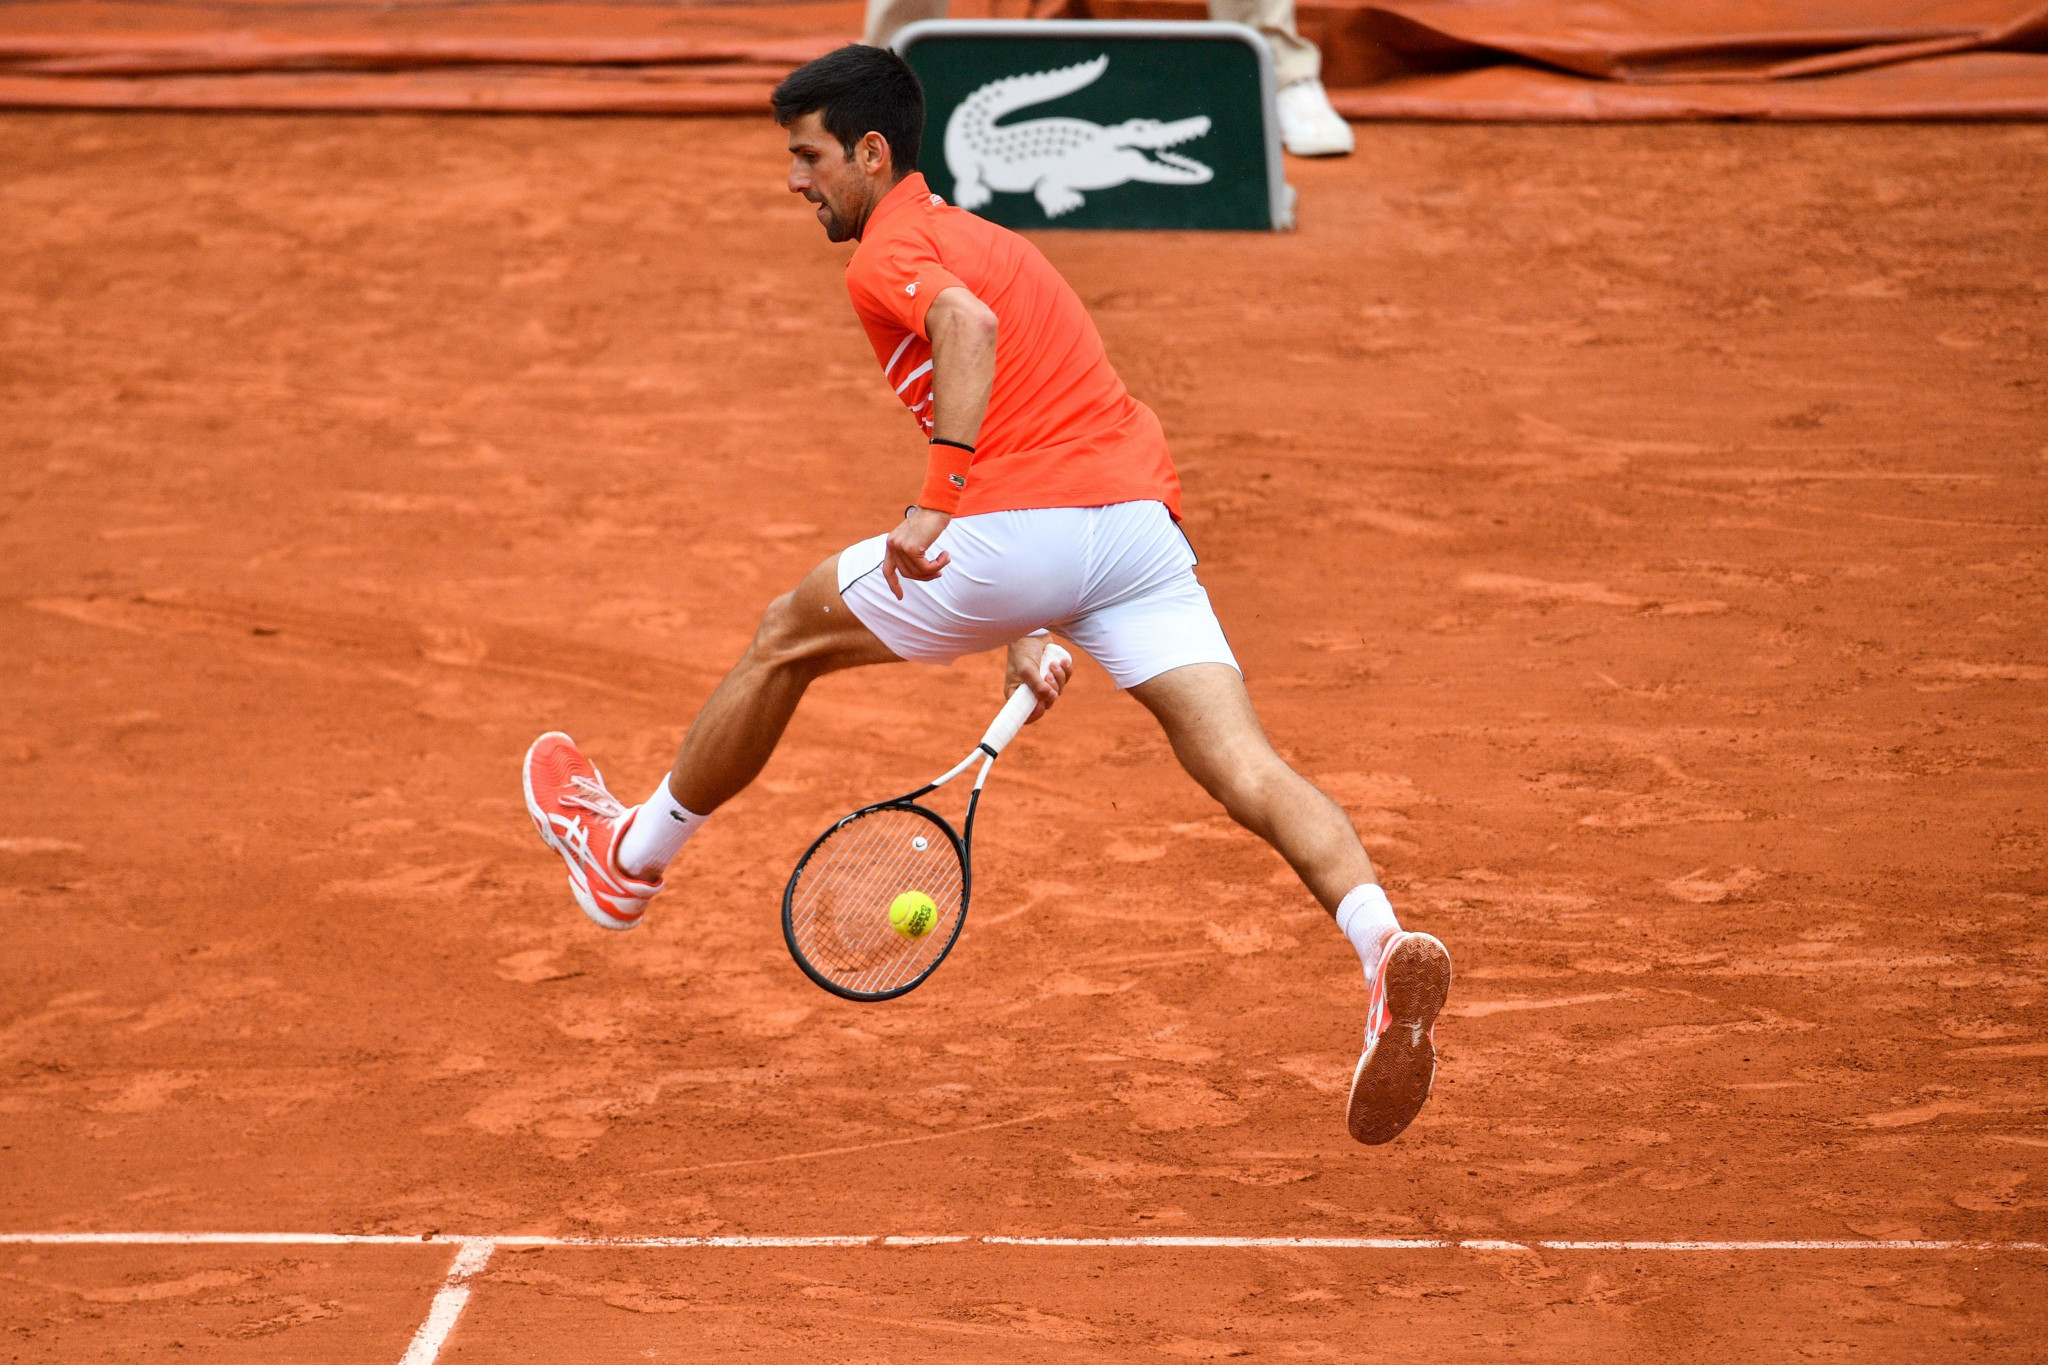 Novak Djokovic turned on the style as he beat Jan-Lennard Struff in the French Open fourth round ©Getty Images